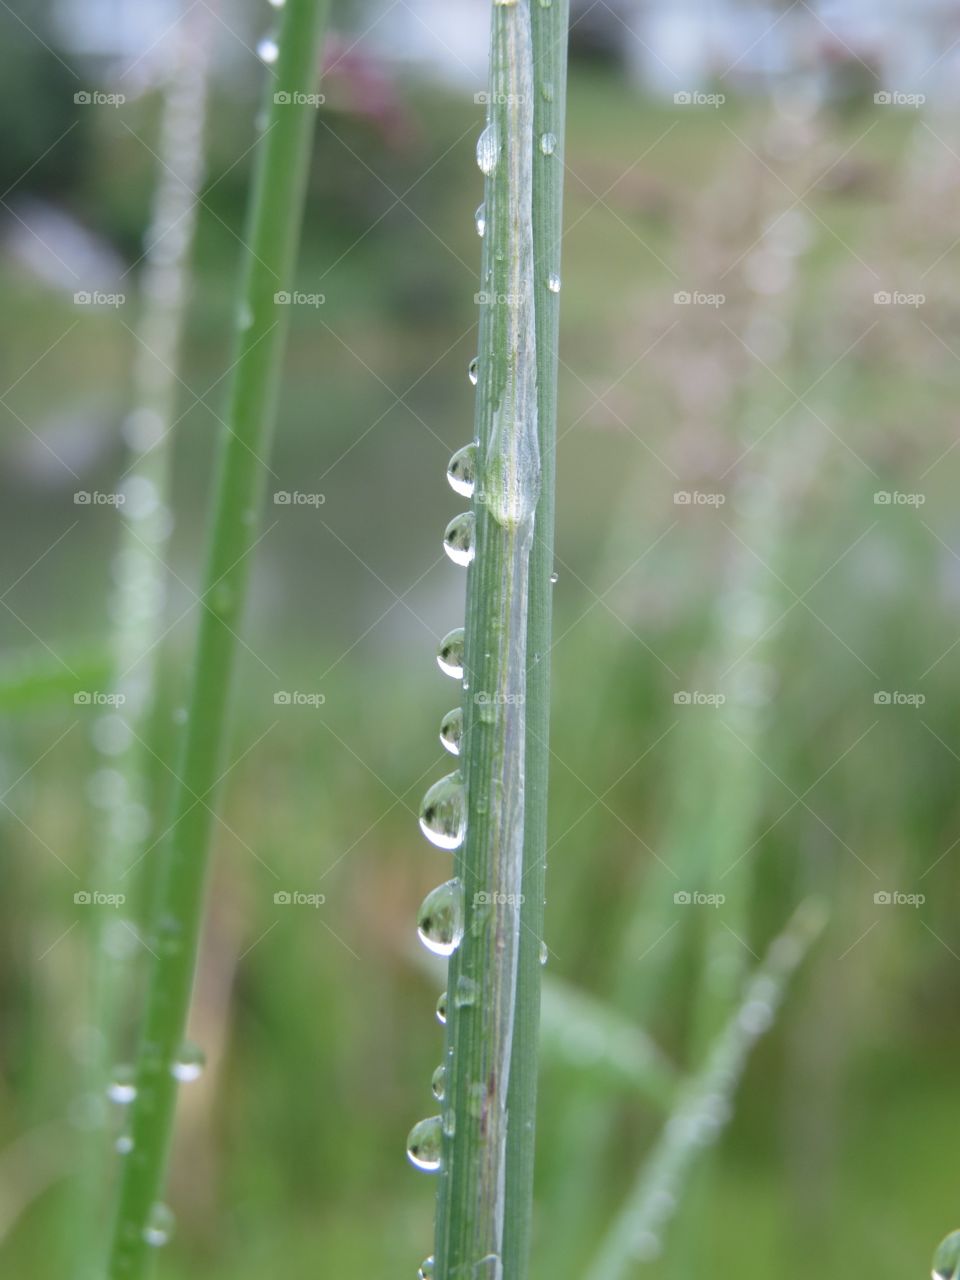 Single blade of grass, after the rain